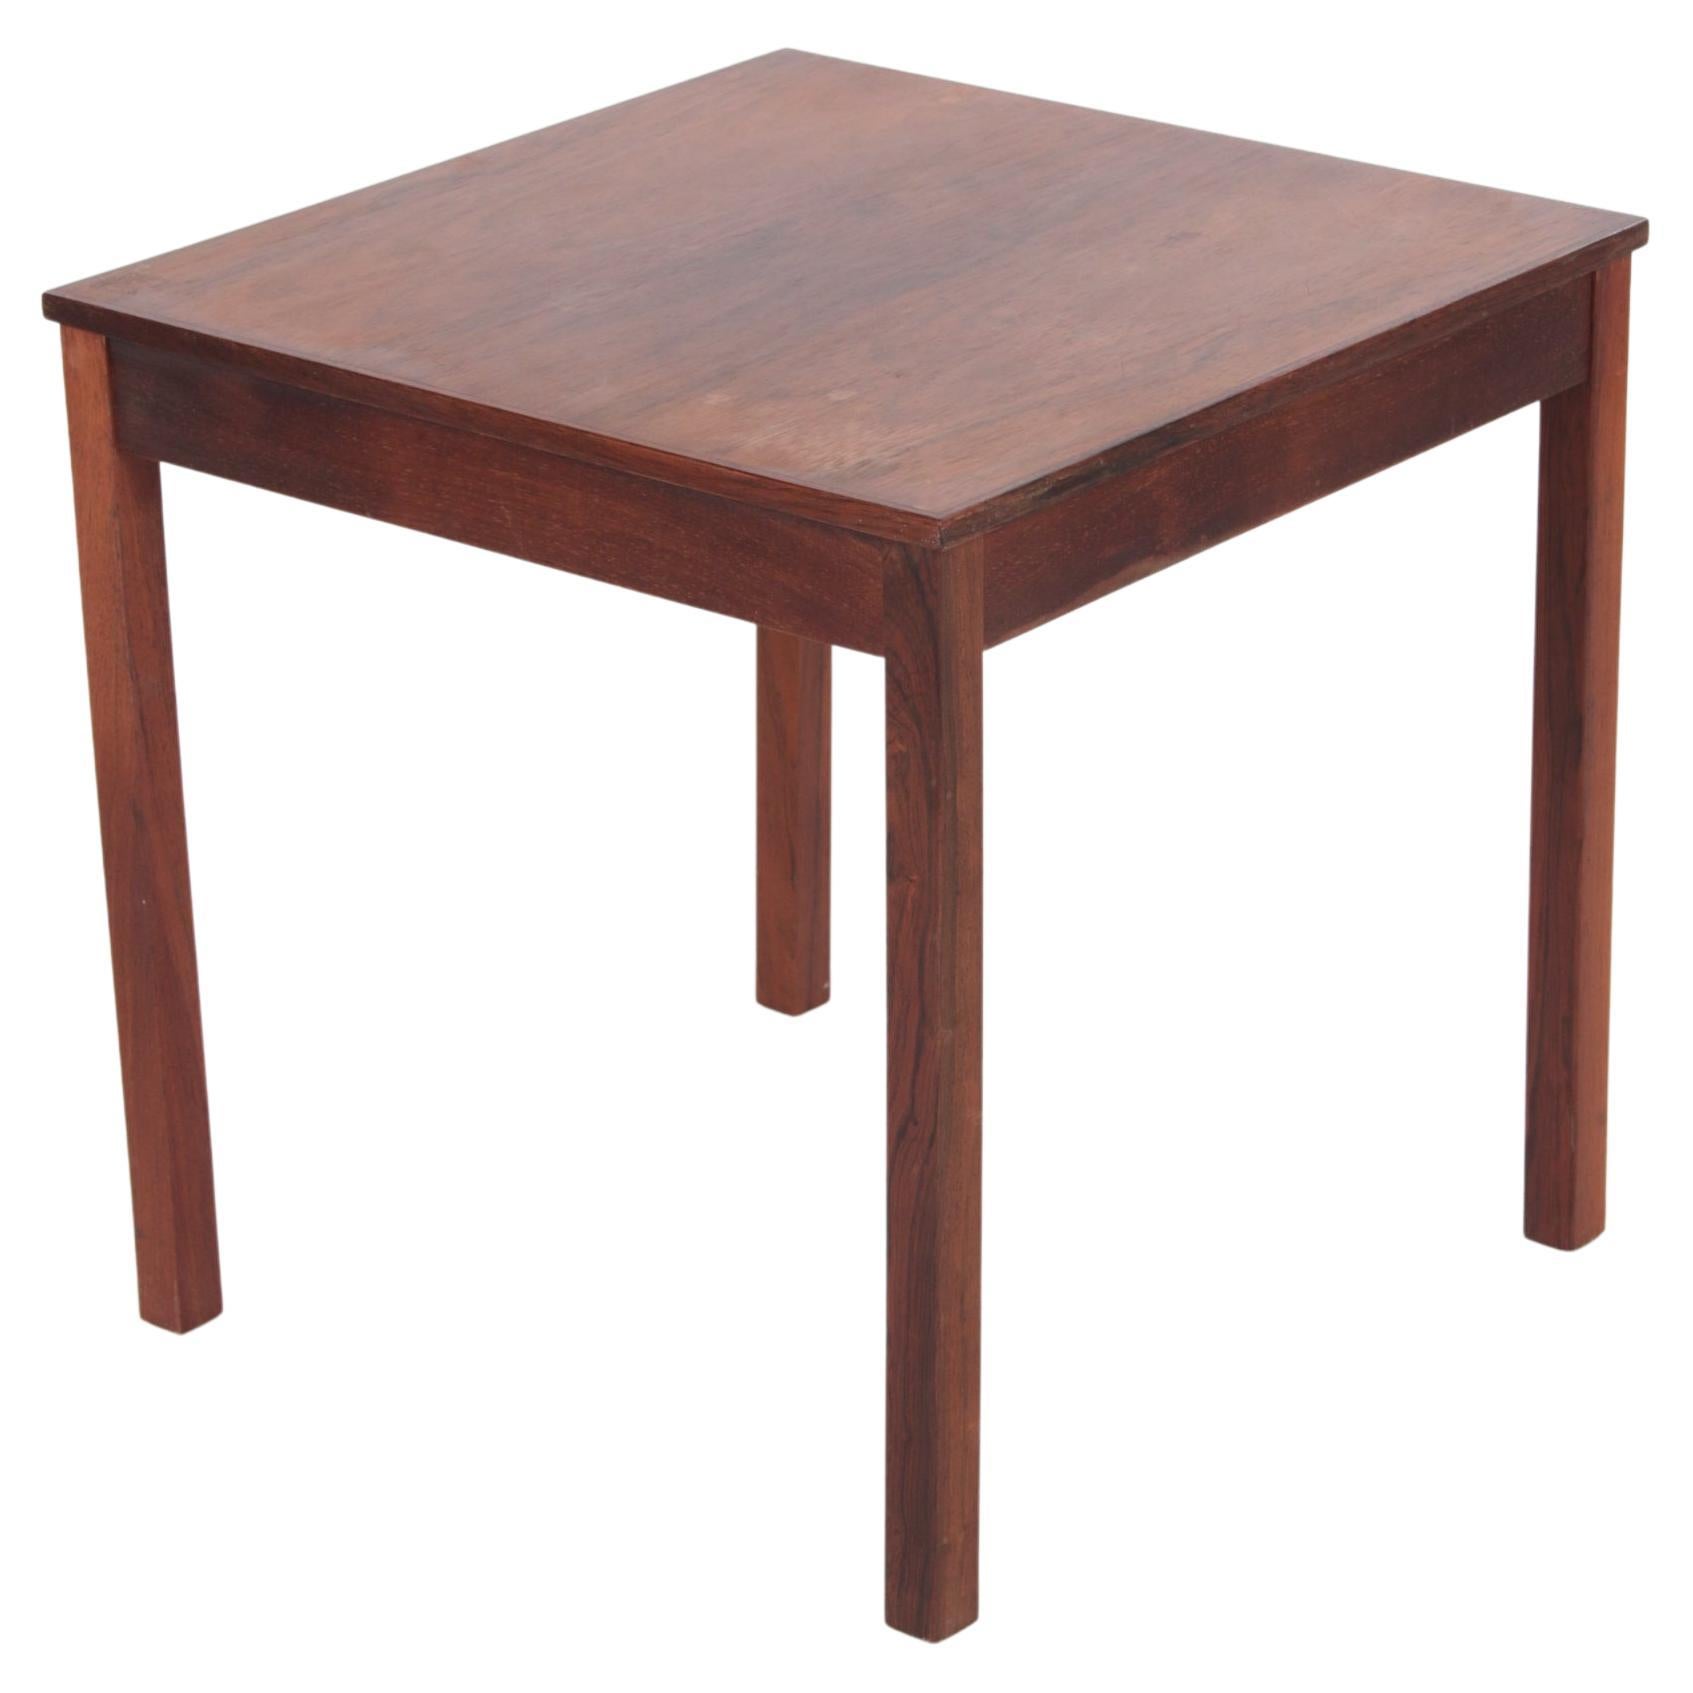 Rosewood coffee table or side table from Denmark